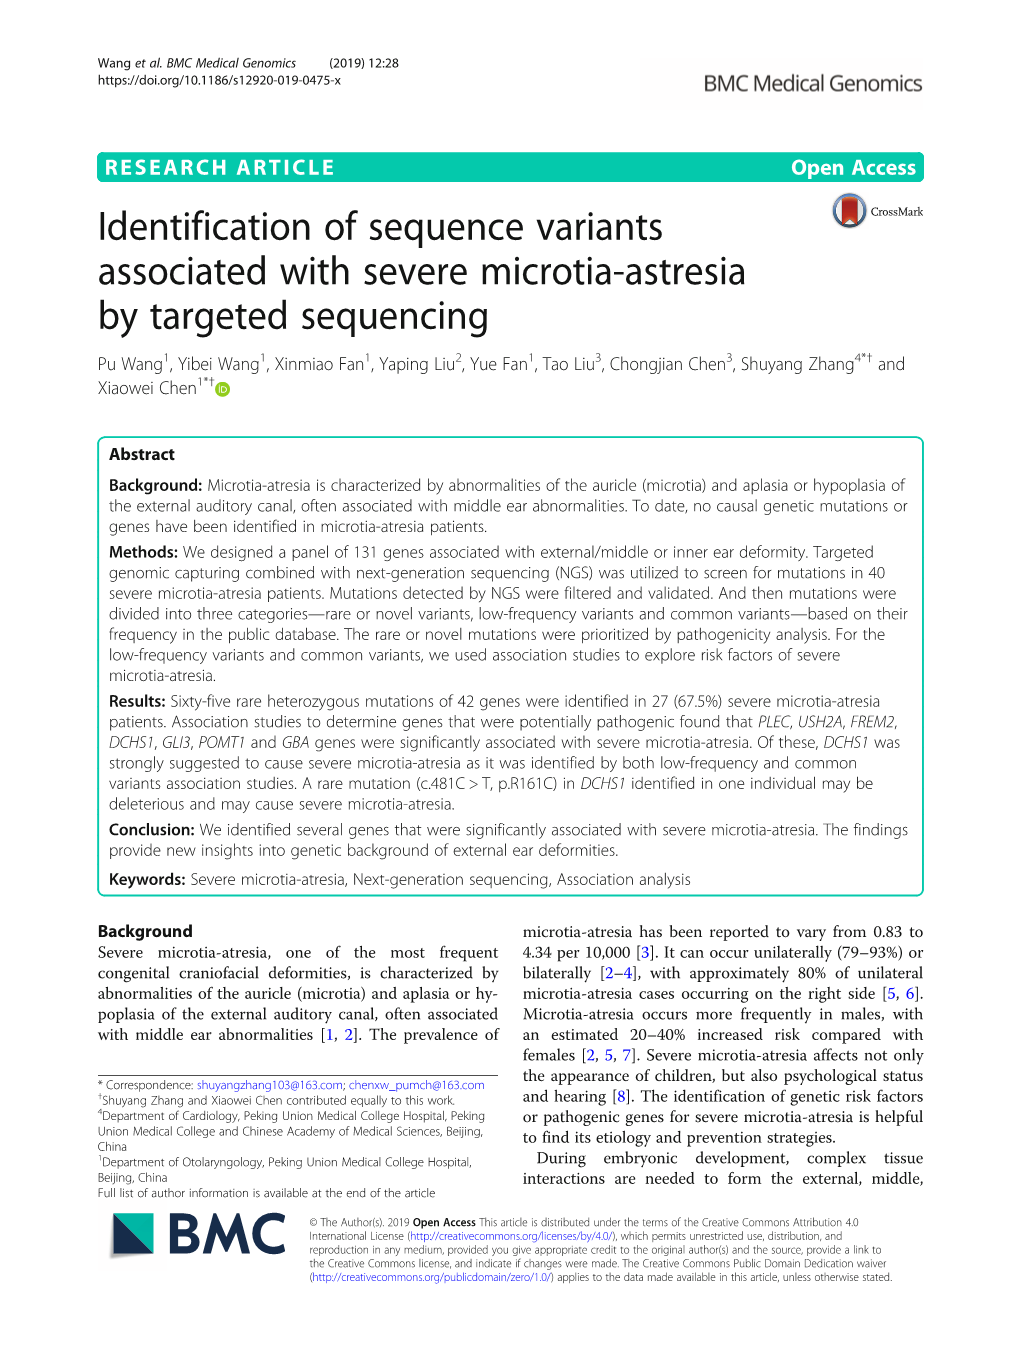 Identification of Sequence Variants